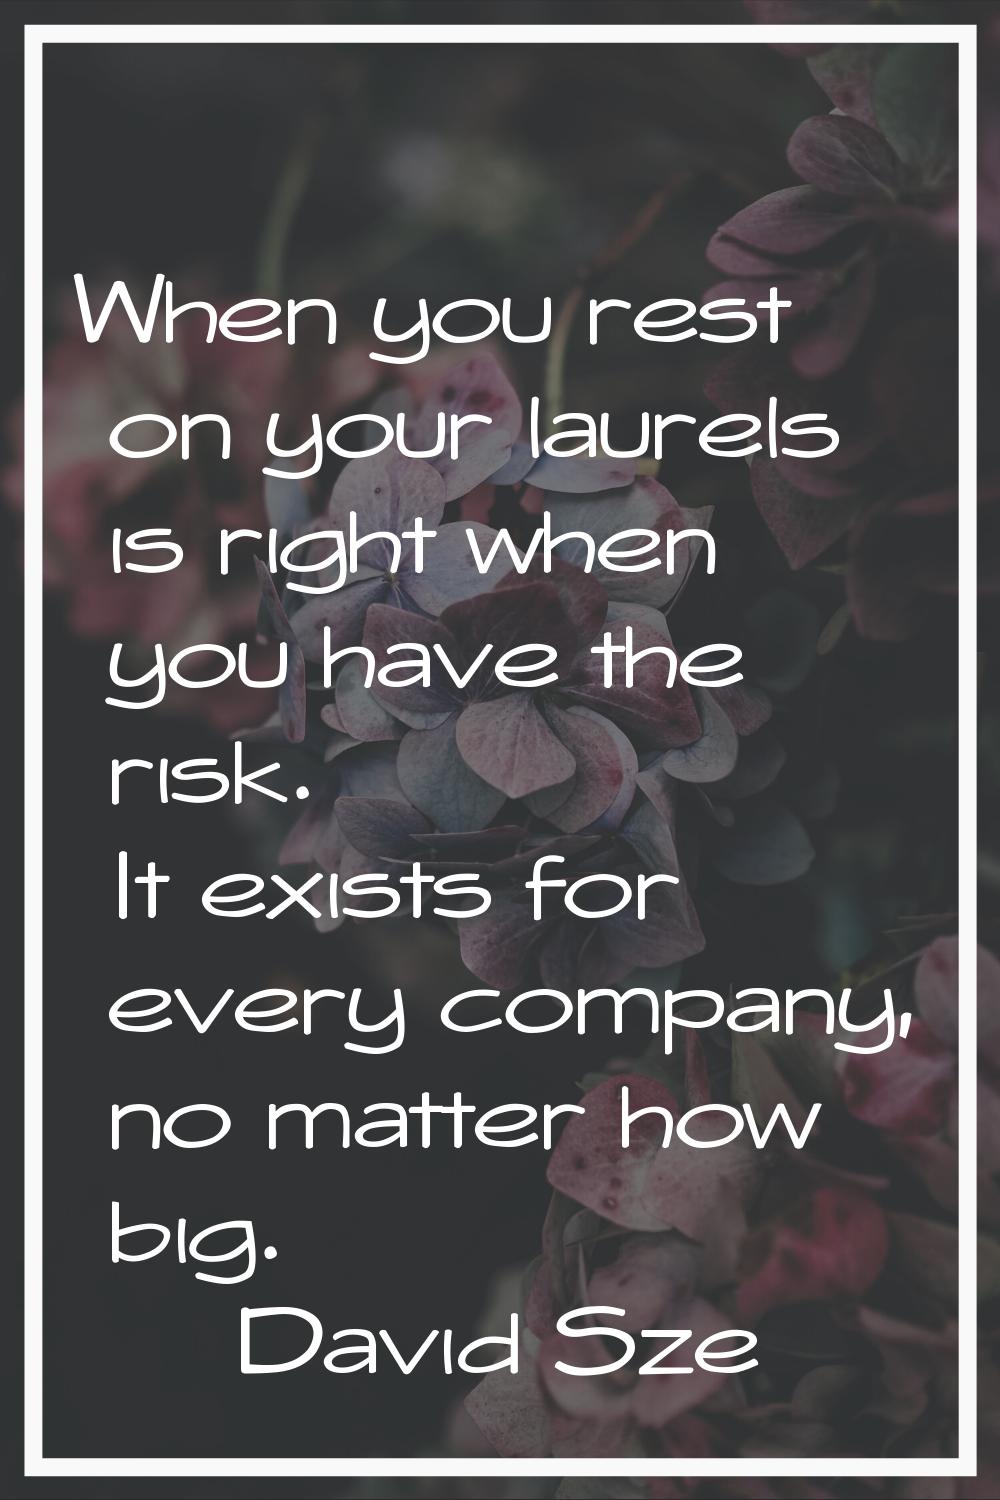 When you rest on your laurels is right when you have the risk. It exists for every company, no matt